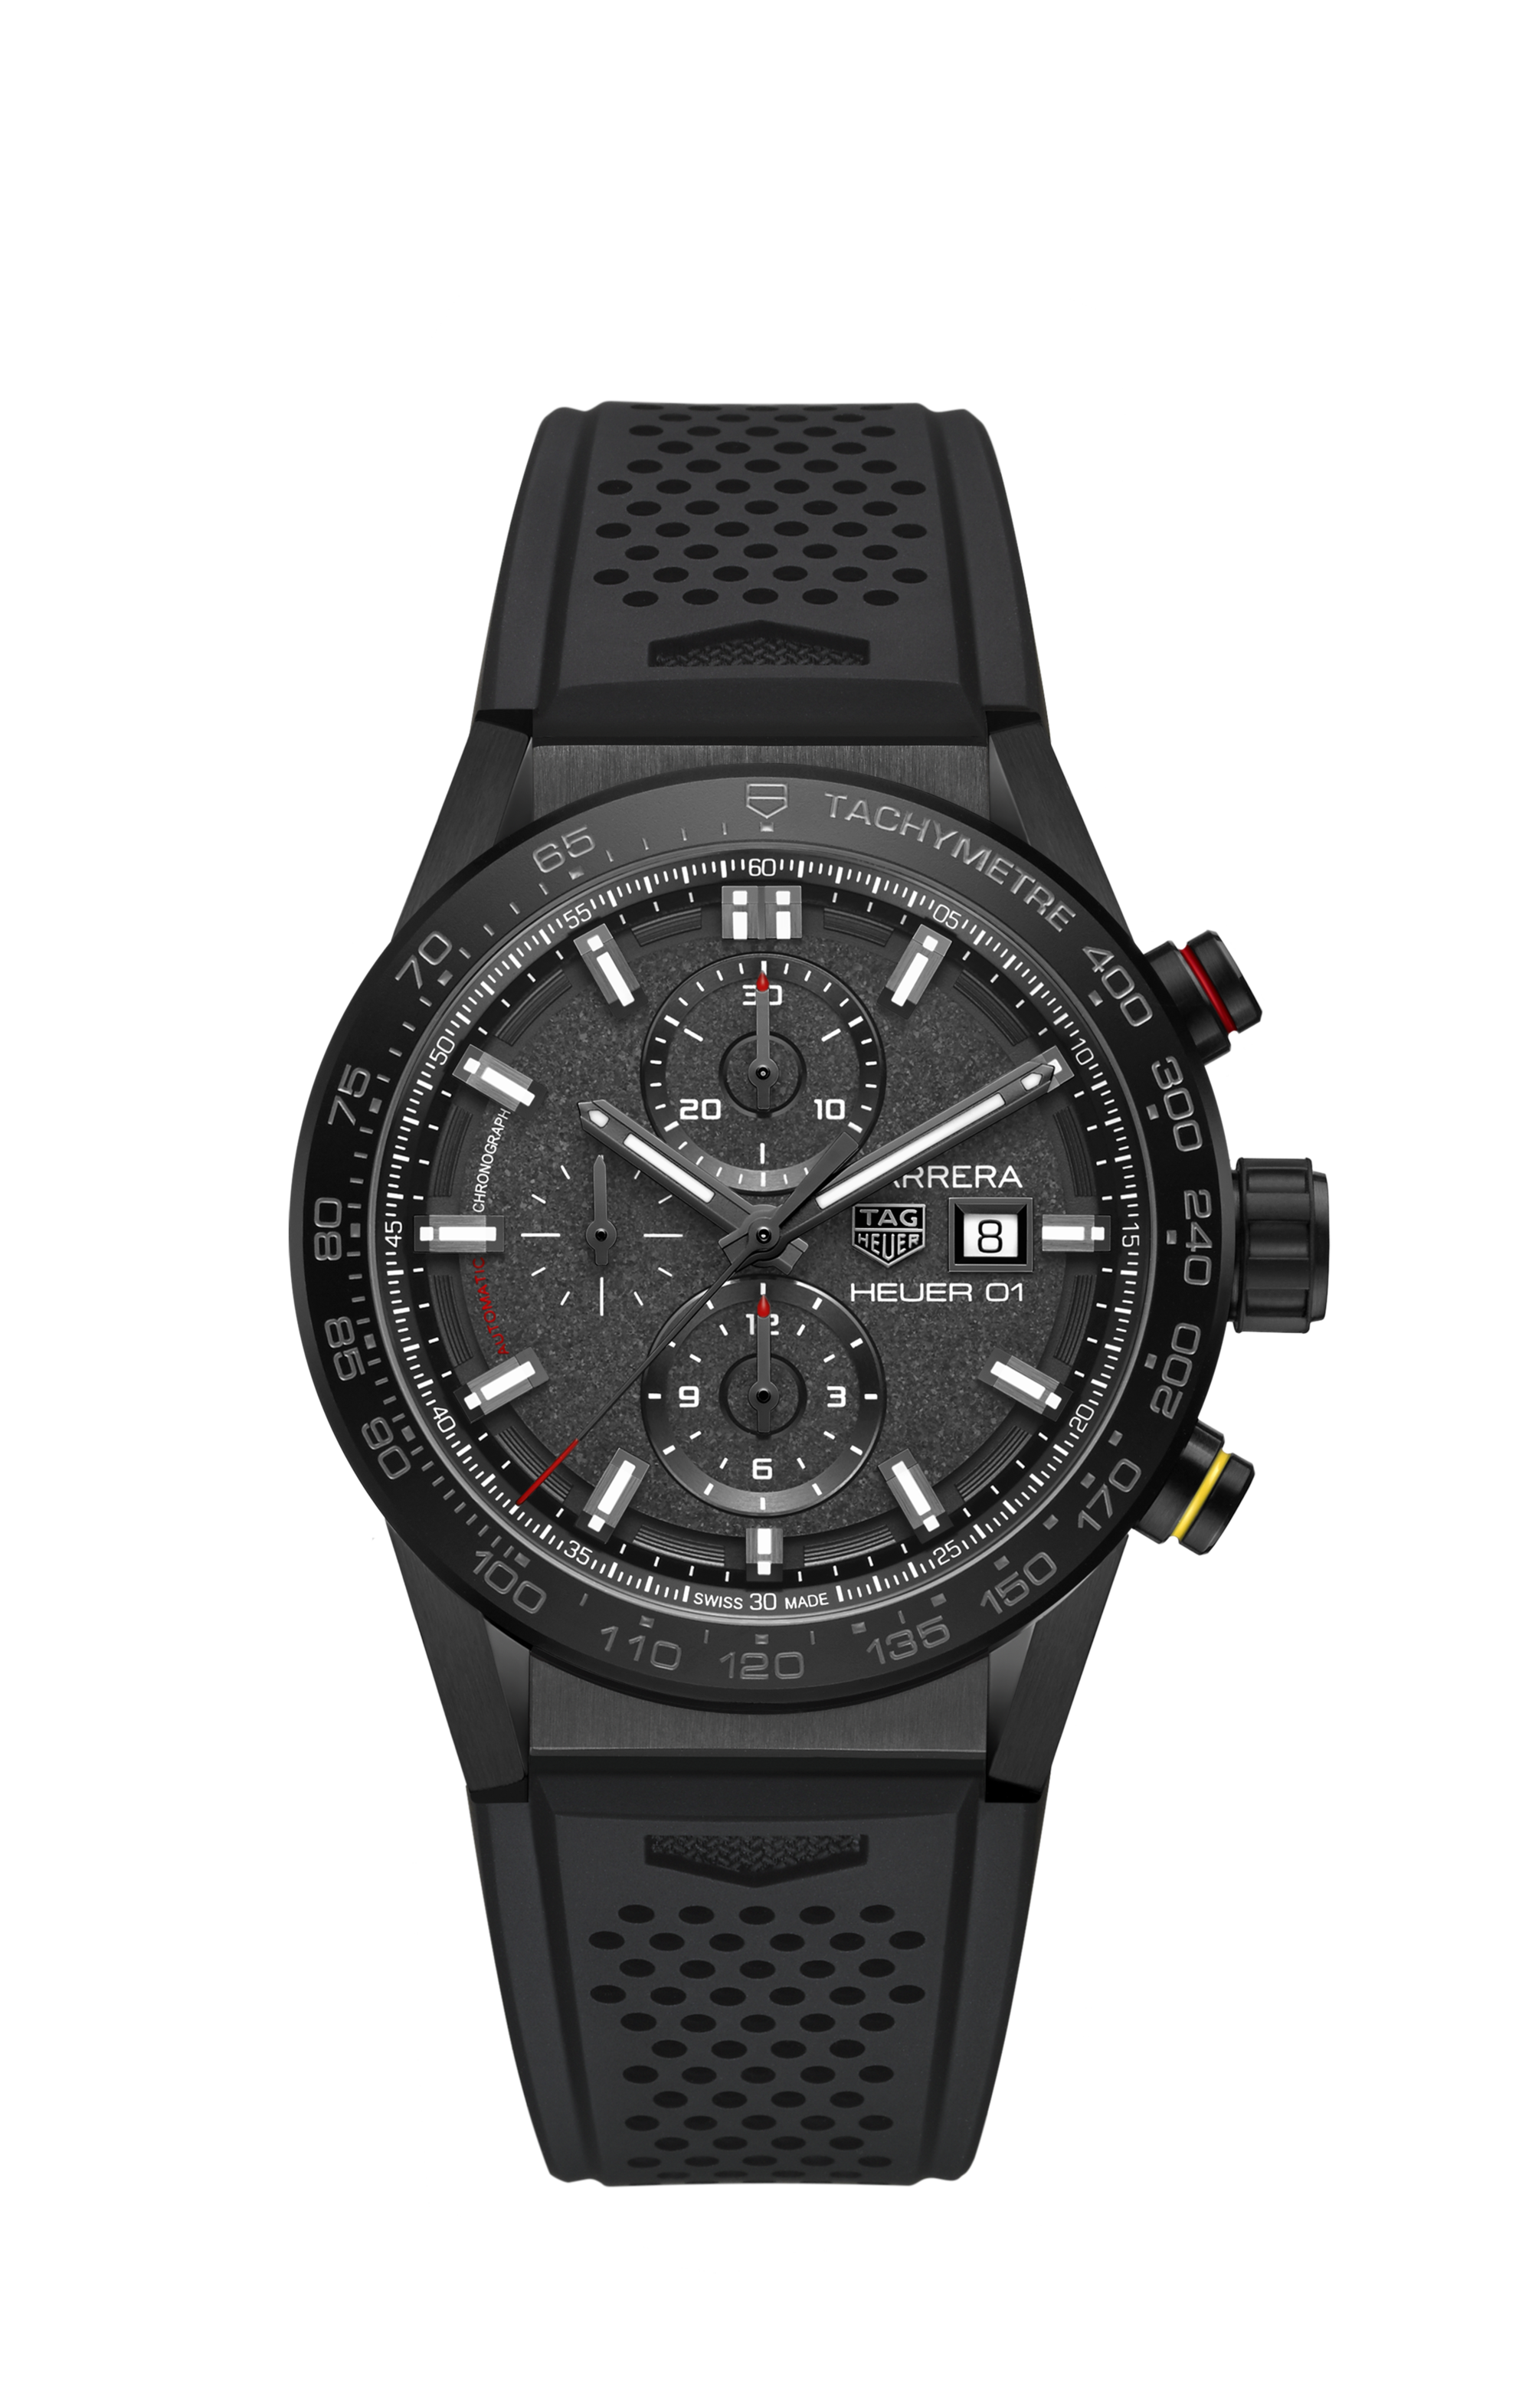 TAG Heuer Carrera Calibre HEUER 01 for $3,174 for sale from a